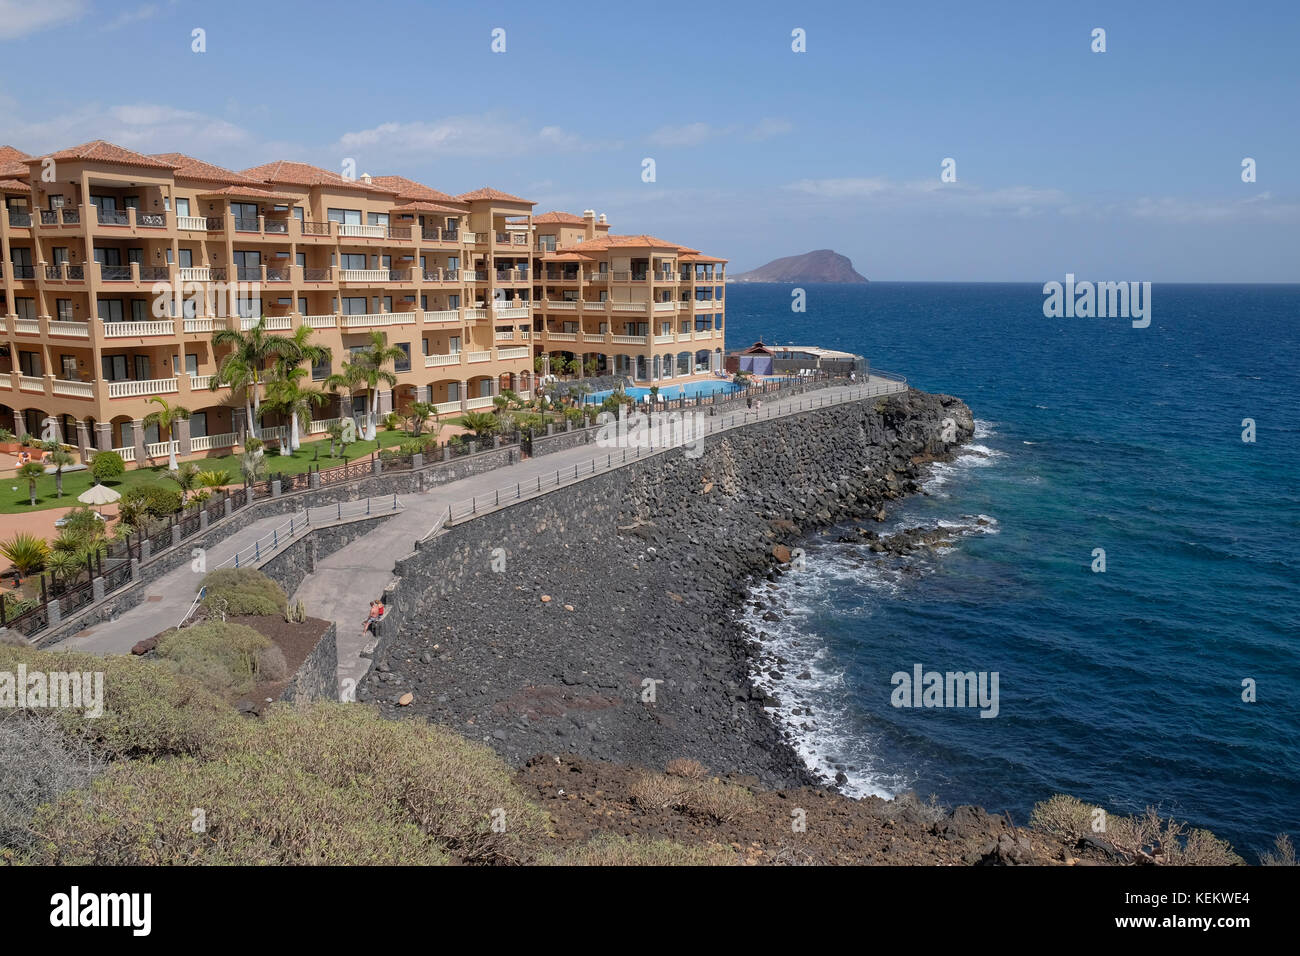 Golf Del Sur Tenerife High Resolution Stock Photography and Images - Alamy